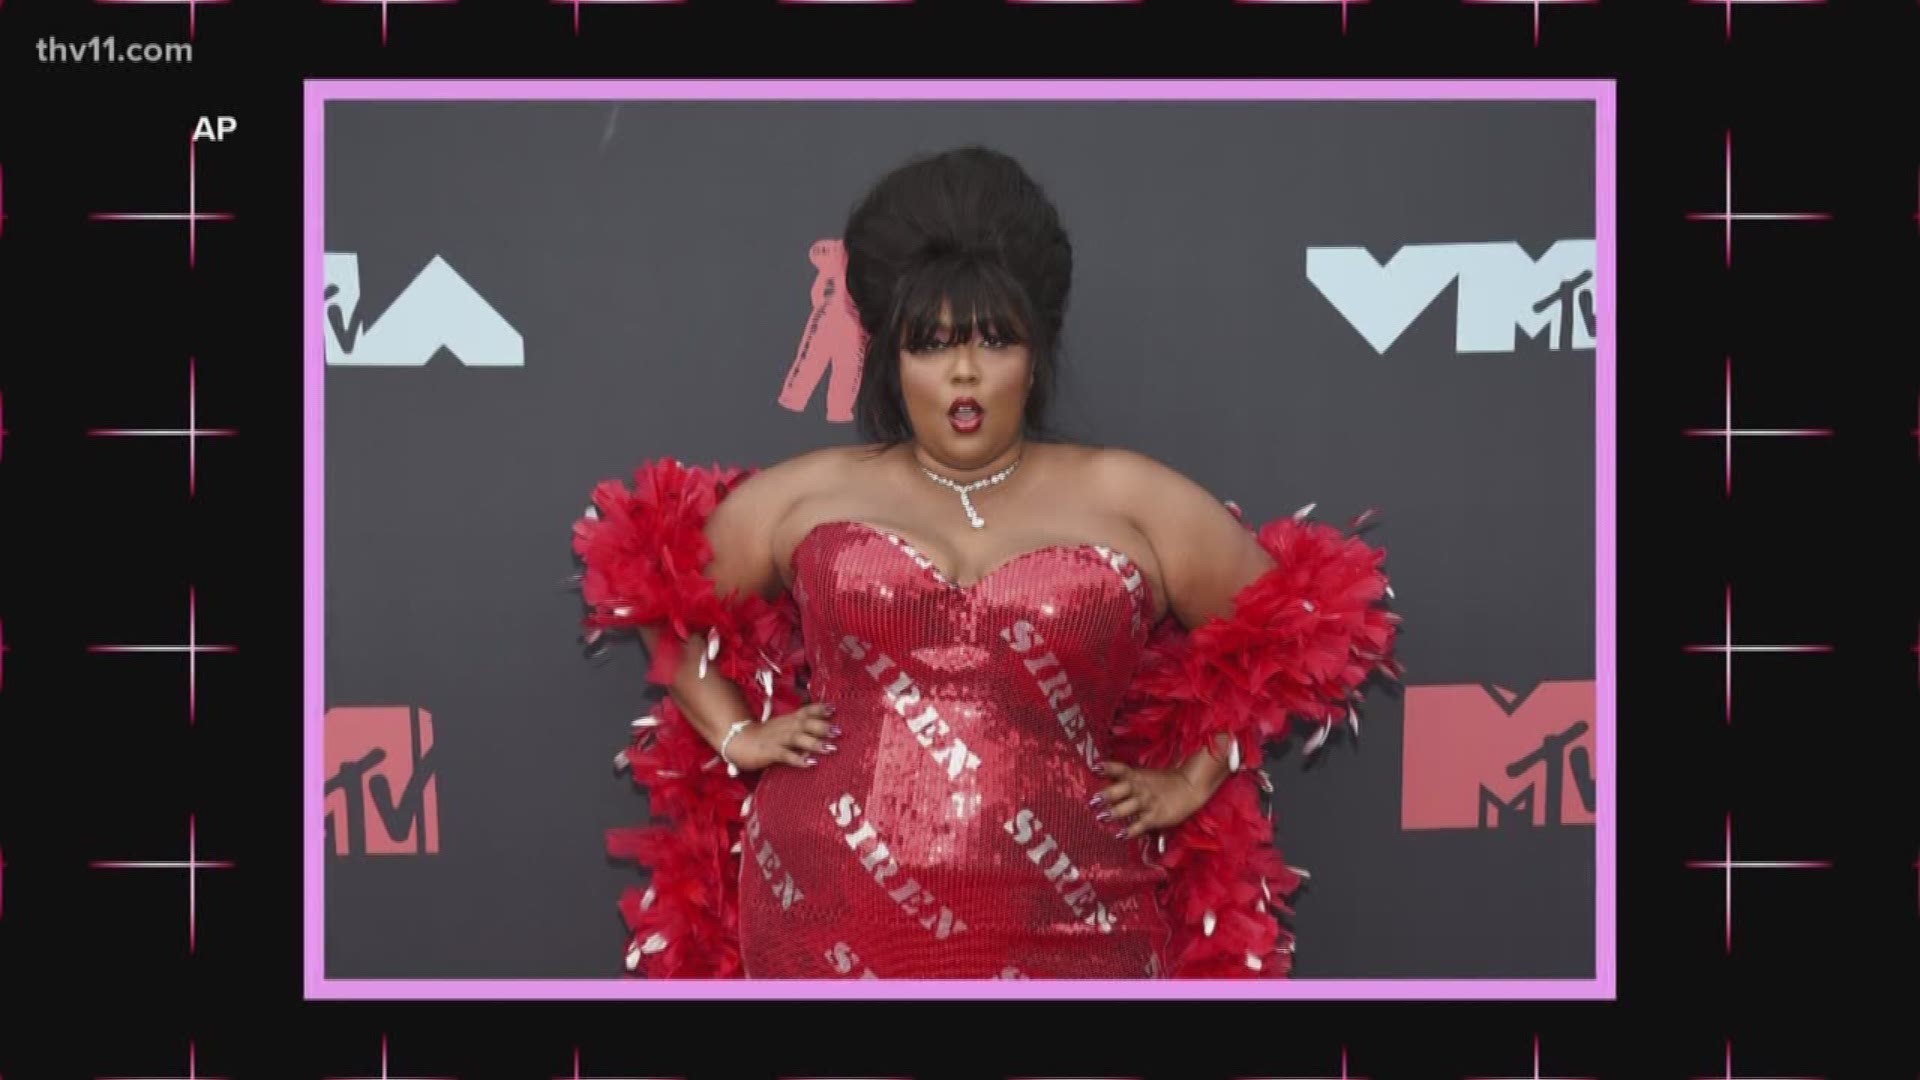 We already know how good Lizzo is feeling, but did you know her amazing outfits are thanks to her stylist, who is from Arkansas?